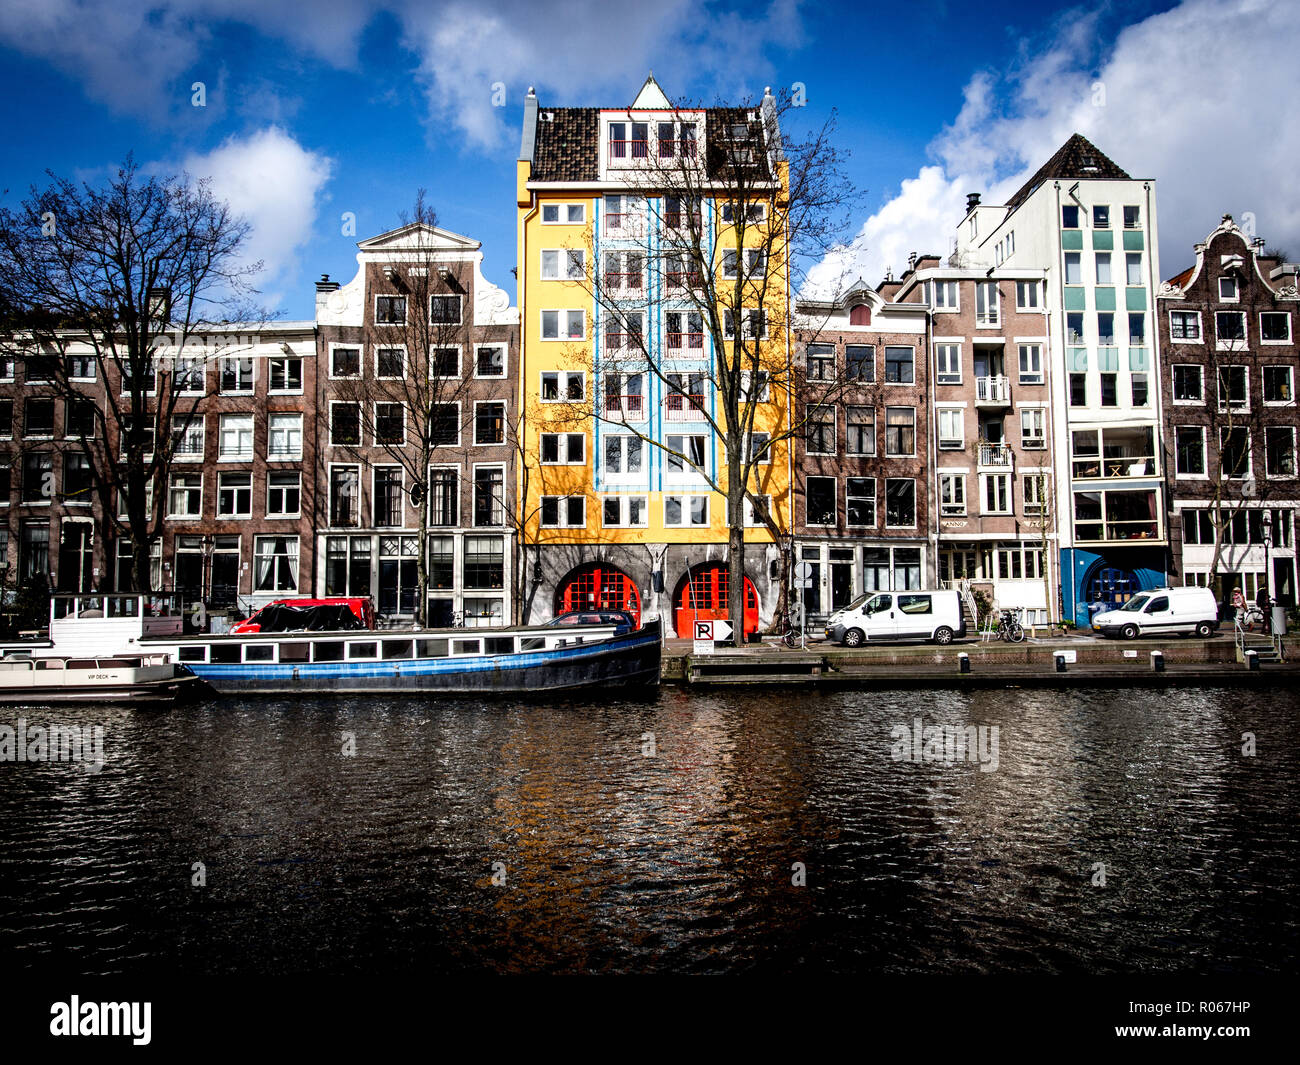 A view of the houseboats and flats from across the river/canal Stock Photo